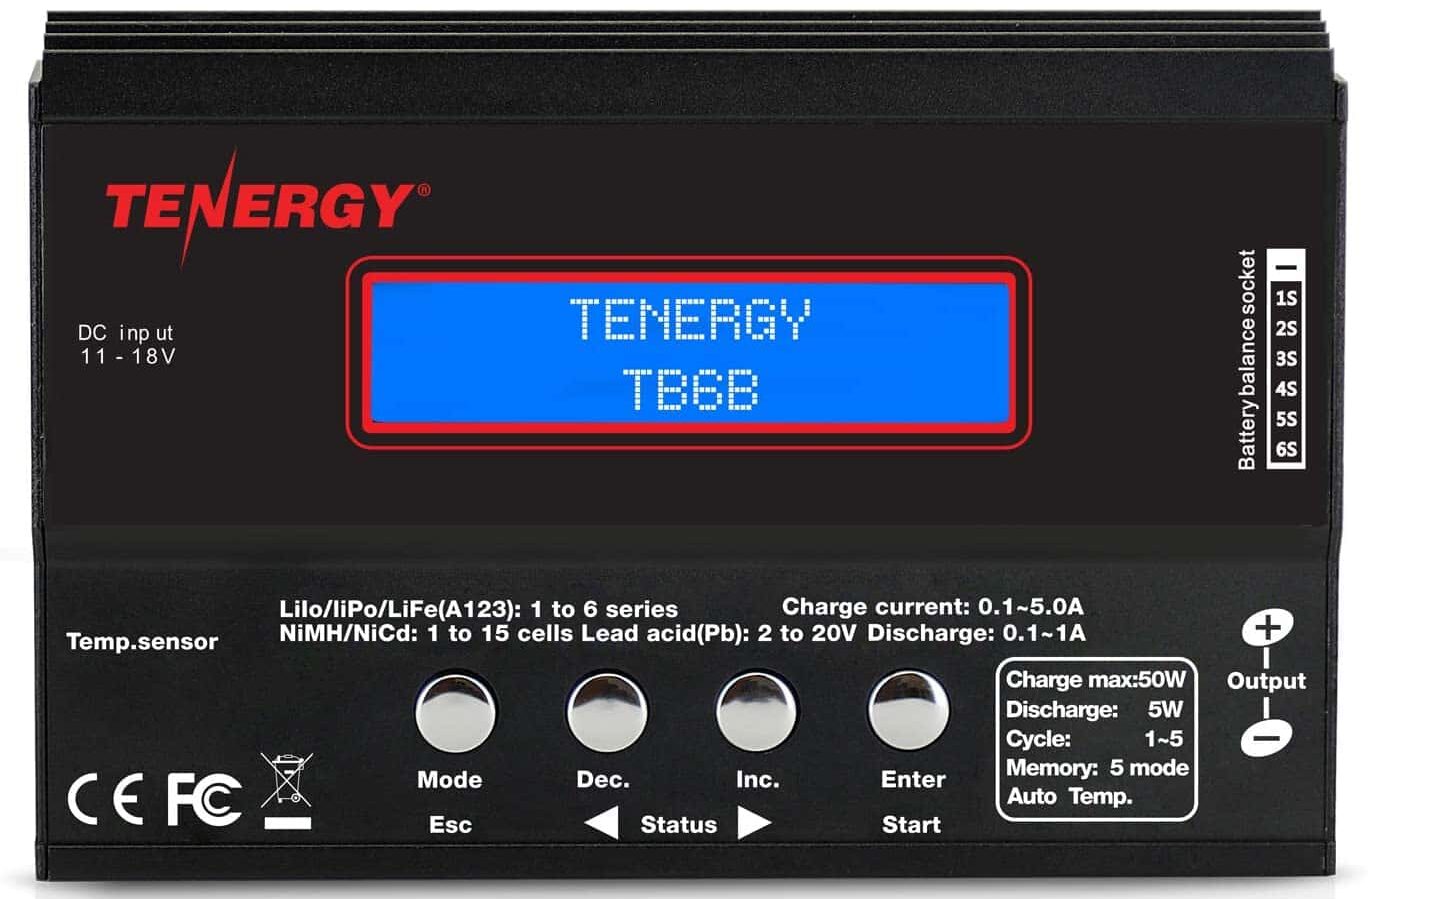 Tenergy TB6-B 50W Best Lipo Battery Charger